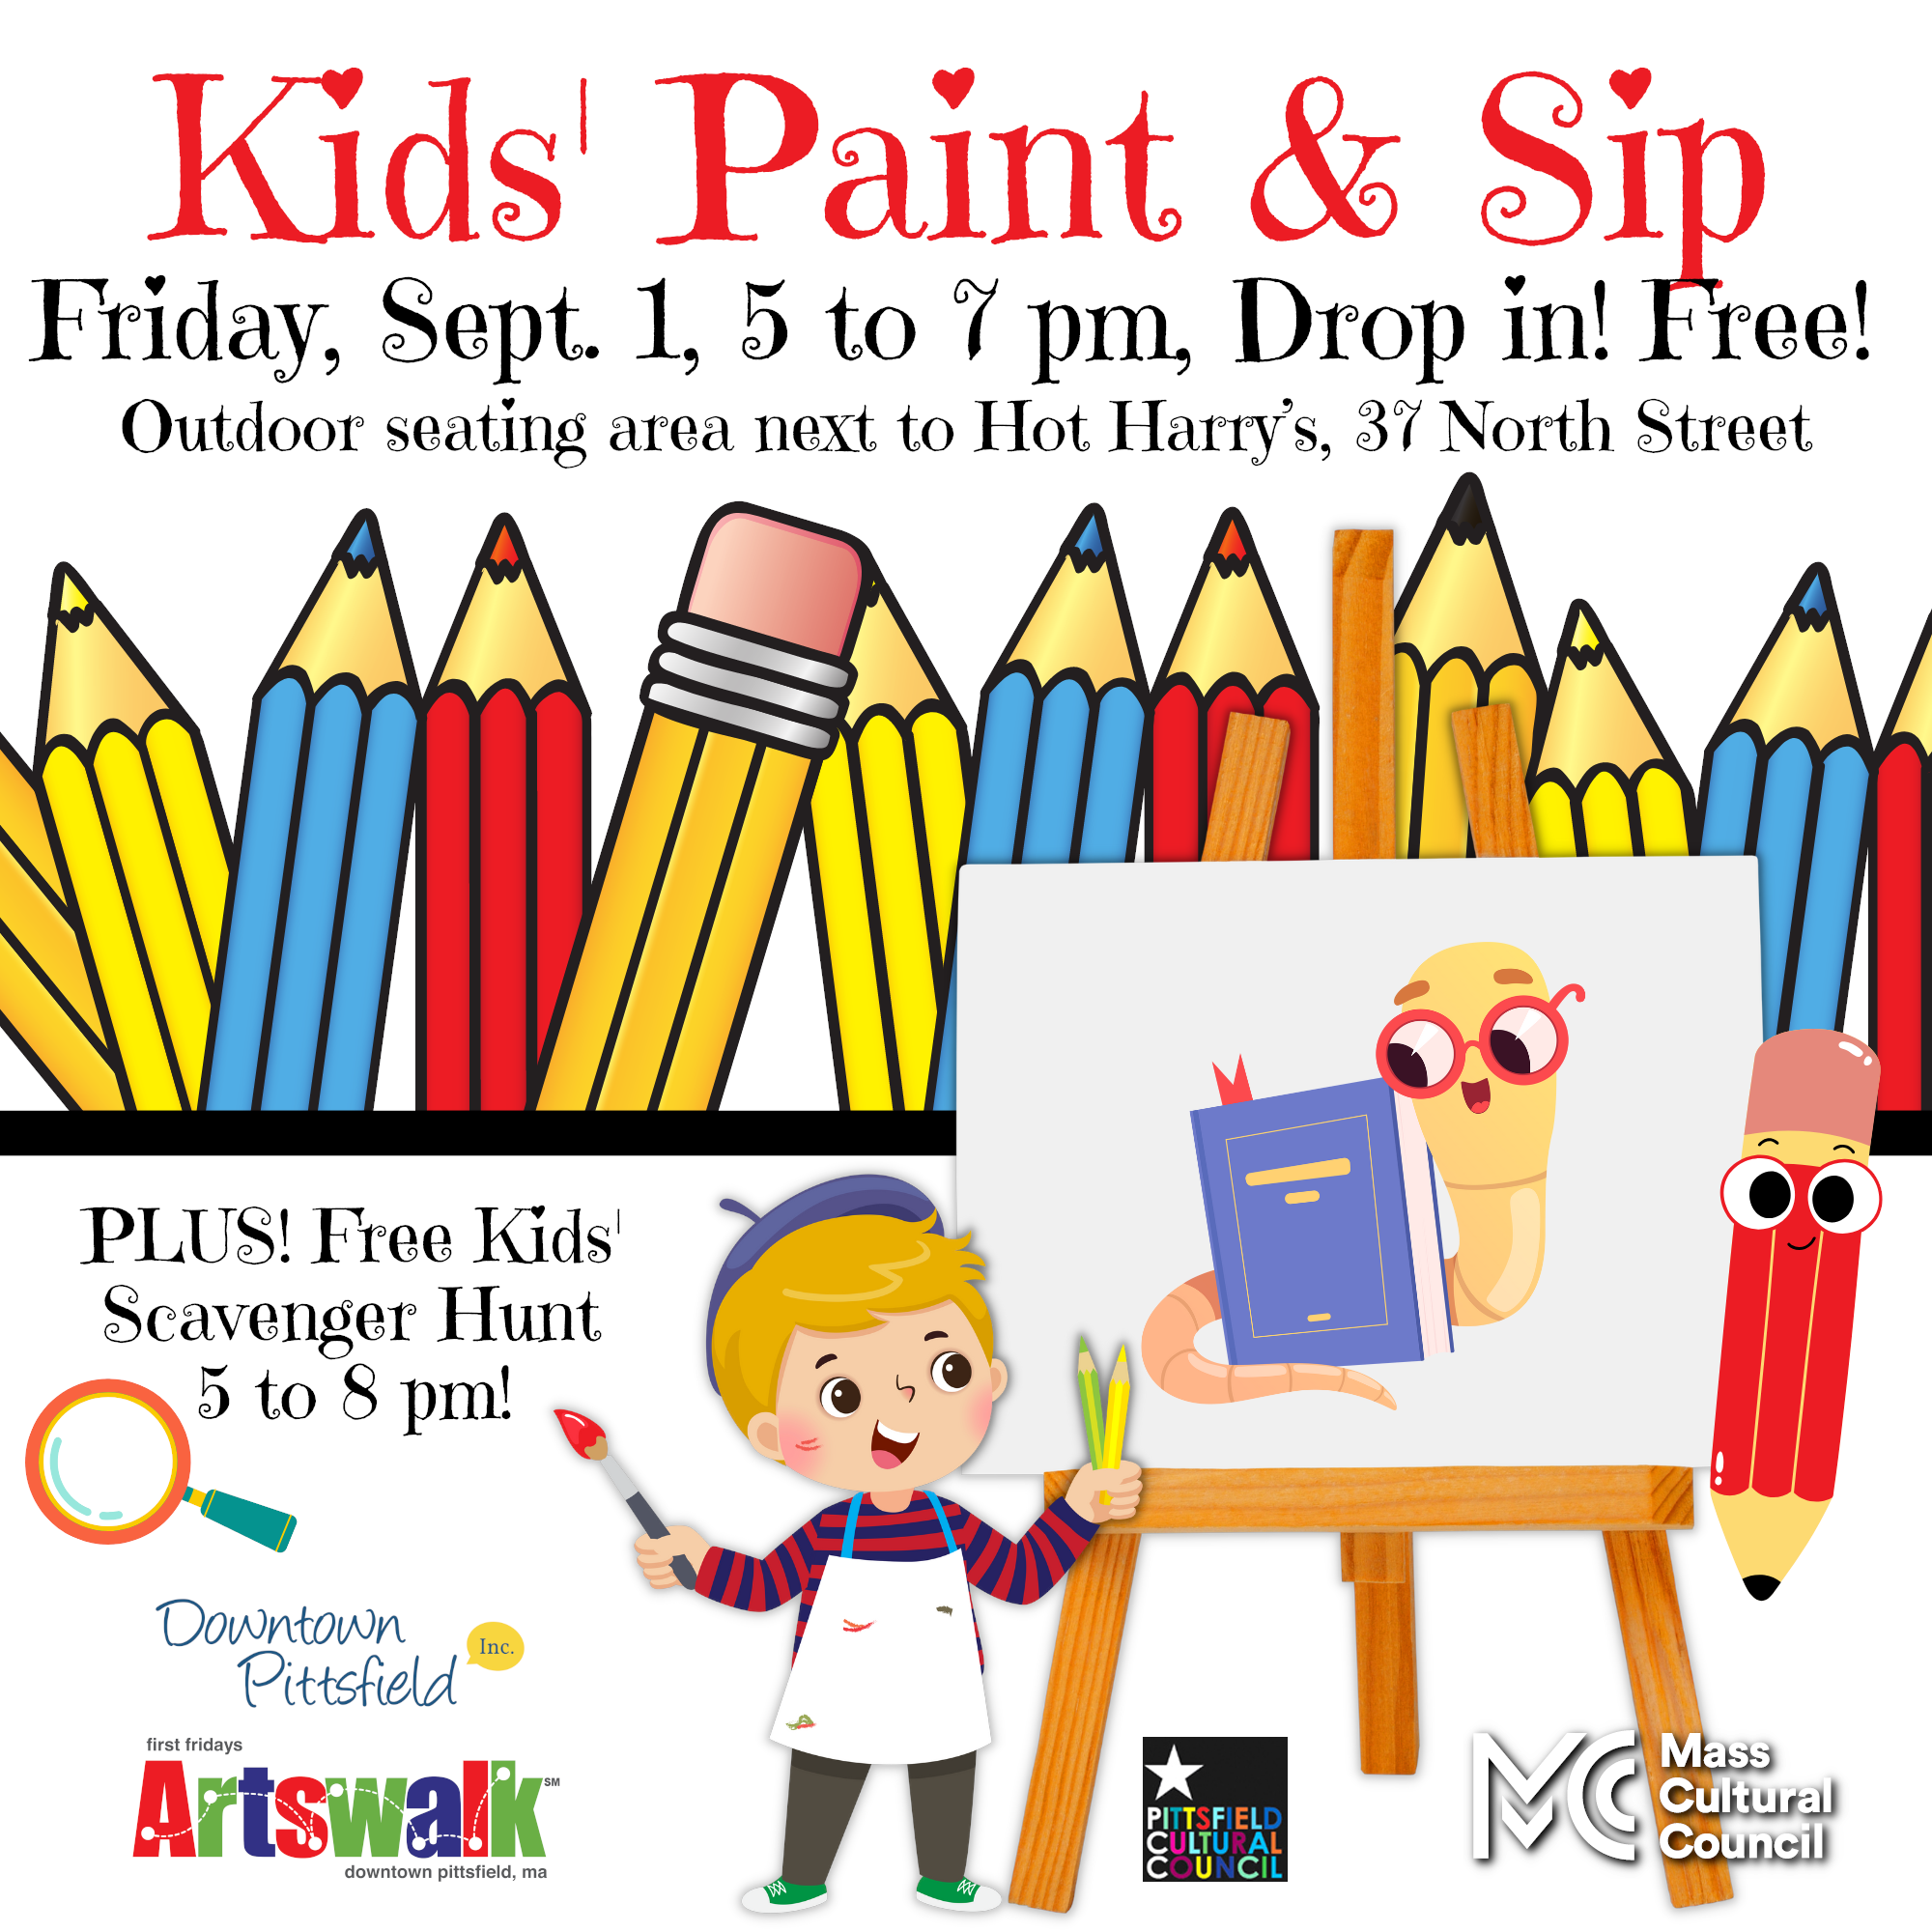 Downtown Pittsfield, Inc. will host a Free Kids’ Paint & Sip and Scavenger Hunt* on Friday, September 1, 5 to 7 pm, in the outdoor seating area next to Hot Harry’s and in front of the Marketplace Cafe (37 & 53 North Street).